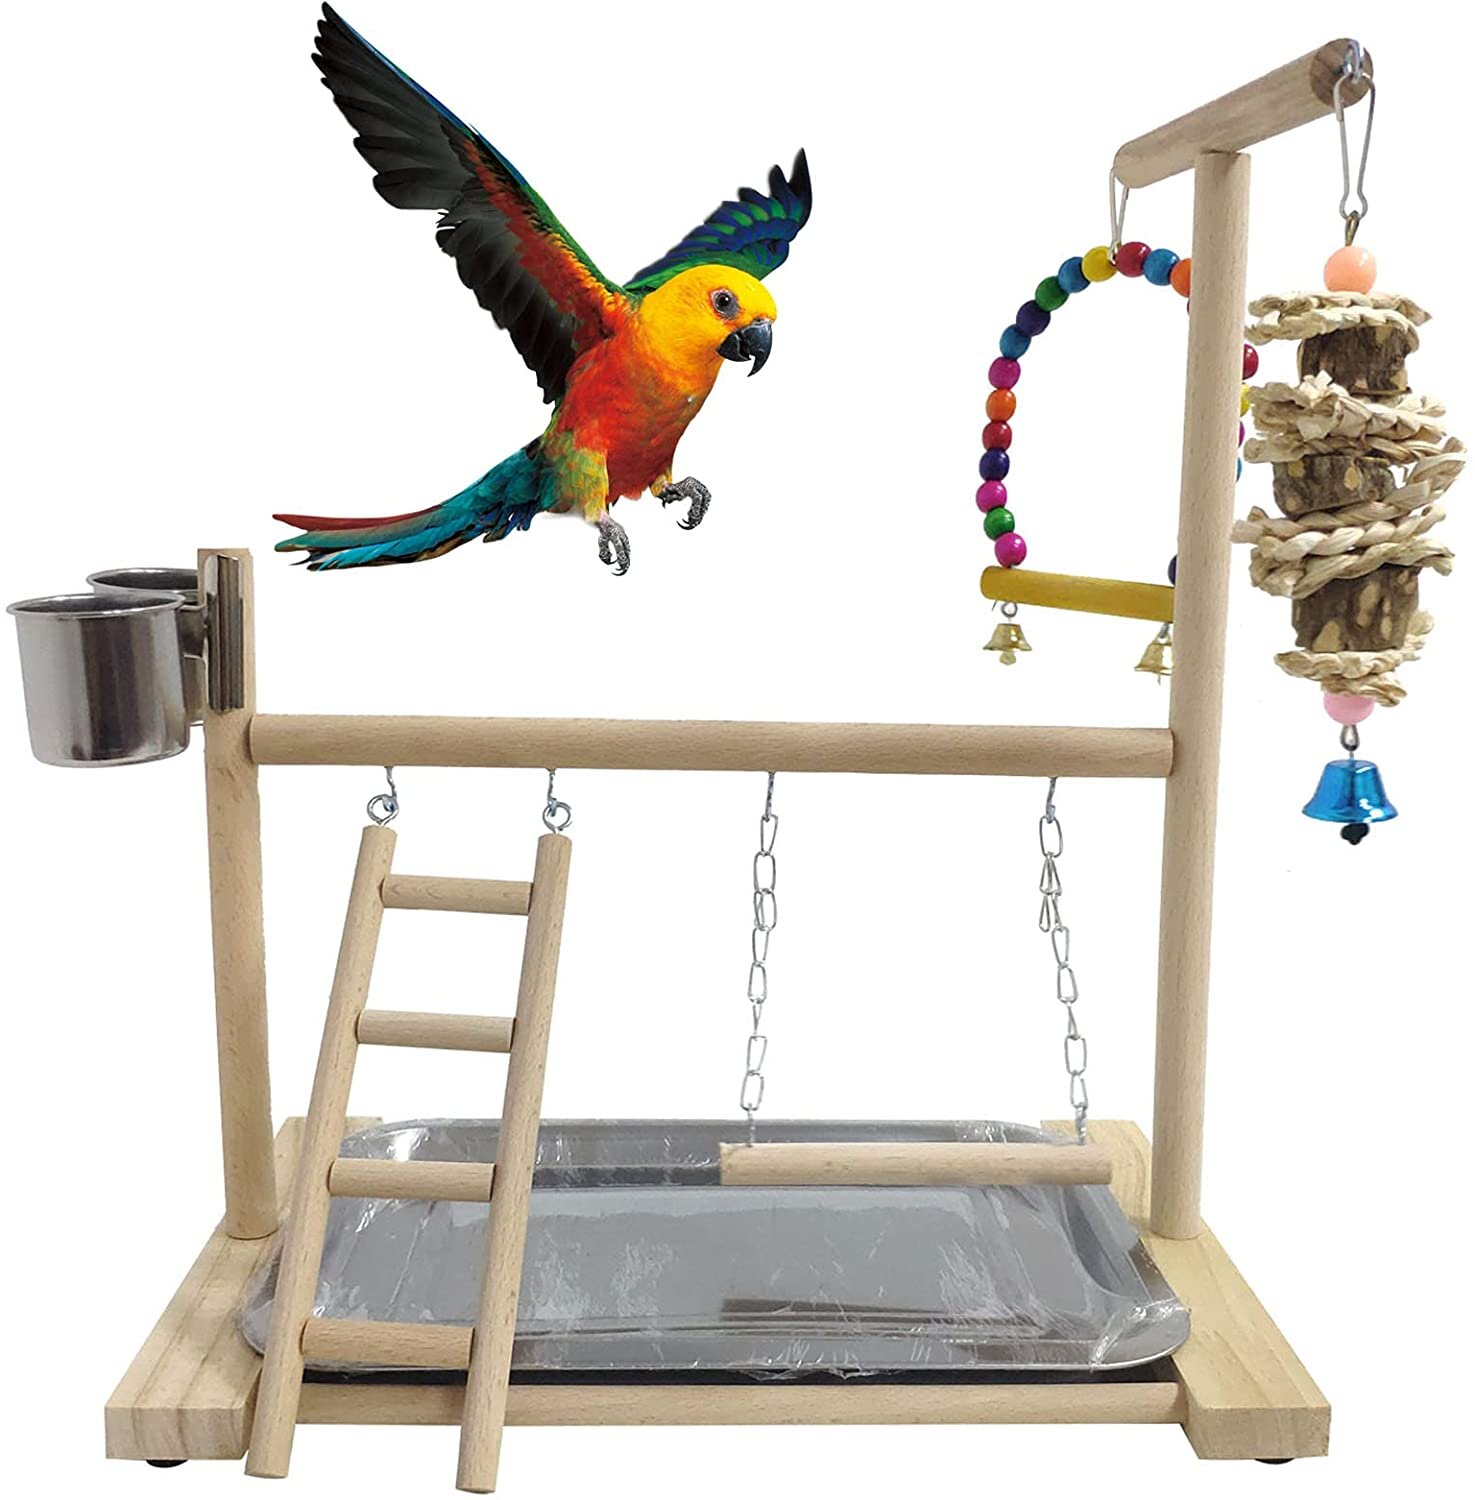 Wooden PLAY STAND Perch Gym Pet Parrot Bird Cages Toy Conure Cockatiels Parakeet